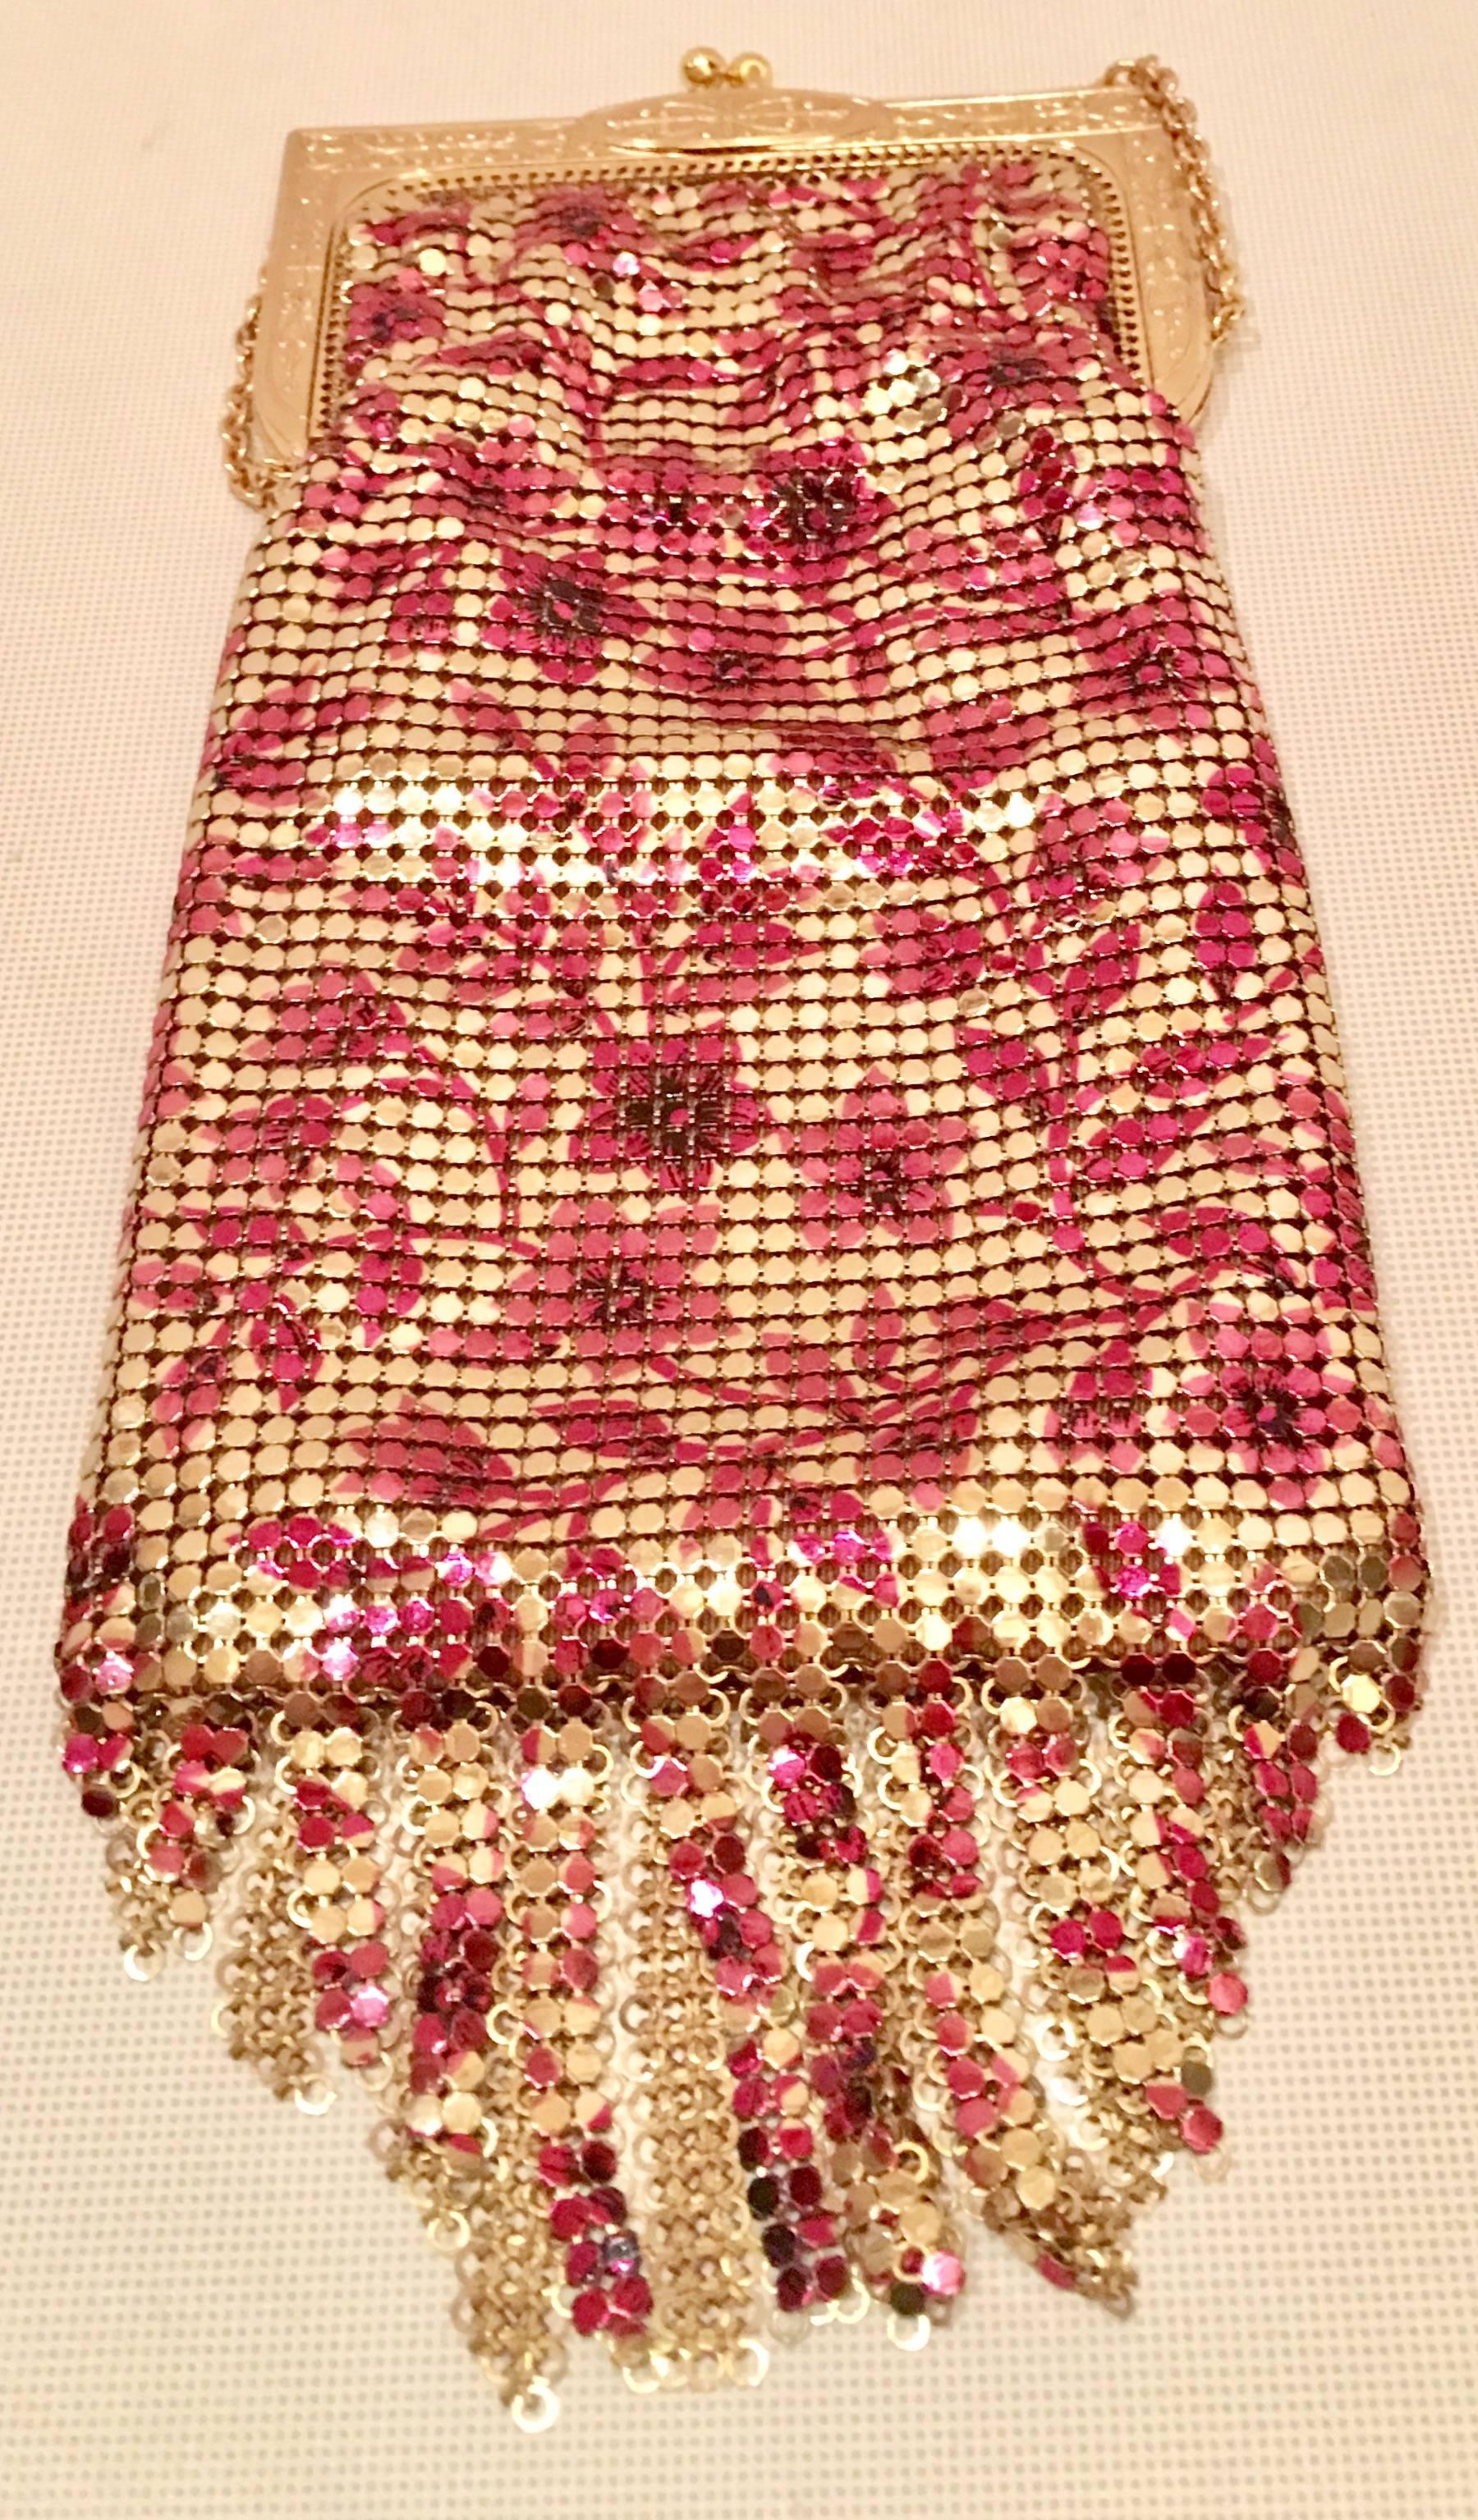 Whiting & Davis Art Deco style gold and ruby metal mesh floral motif 110th anniversary "Heritage" flapper bag. Features a fringe detail bottom and chain link shoulder strap. This bag is new and never before used and includes the